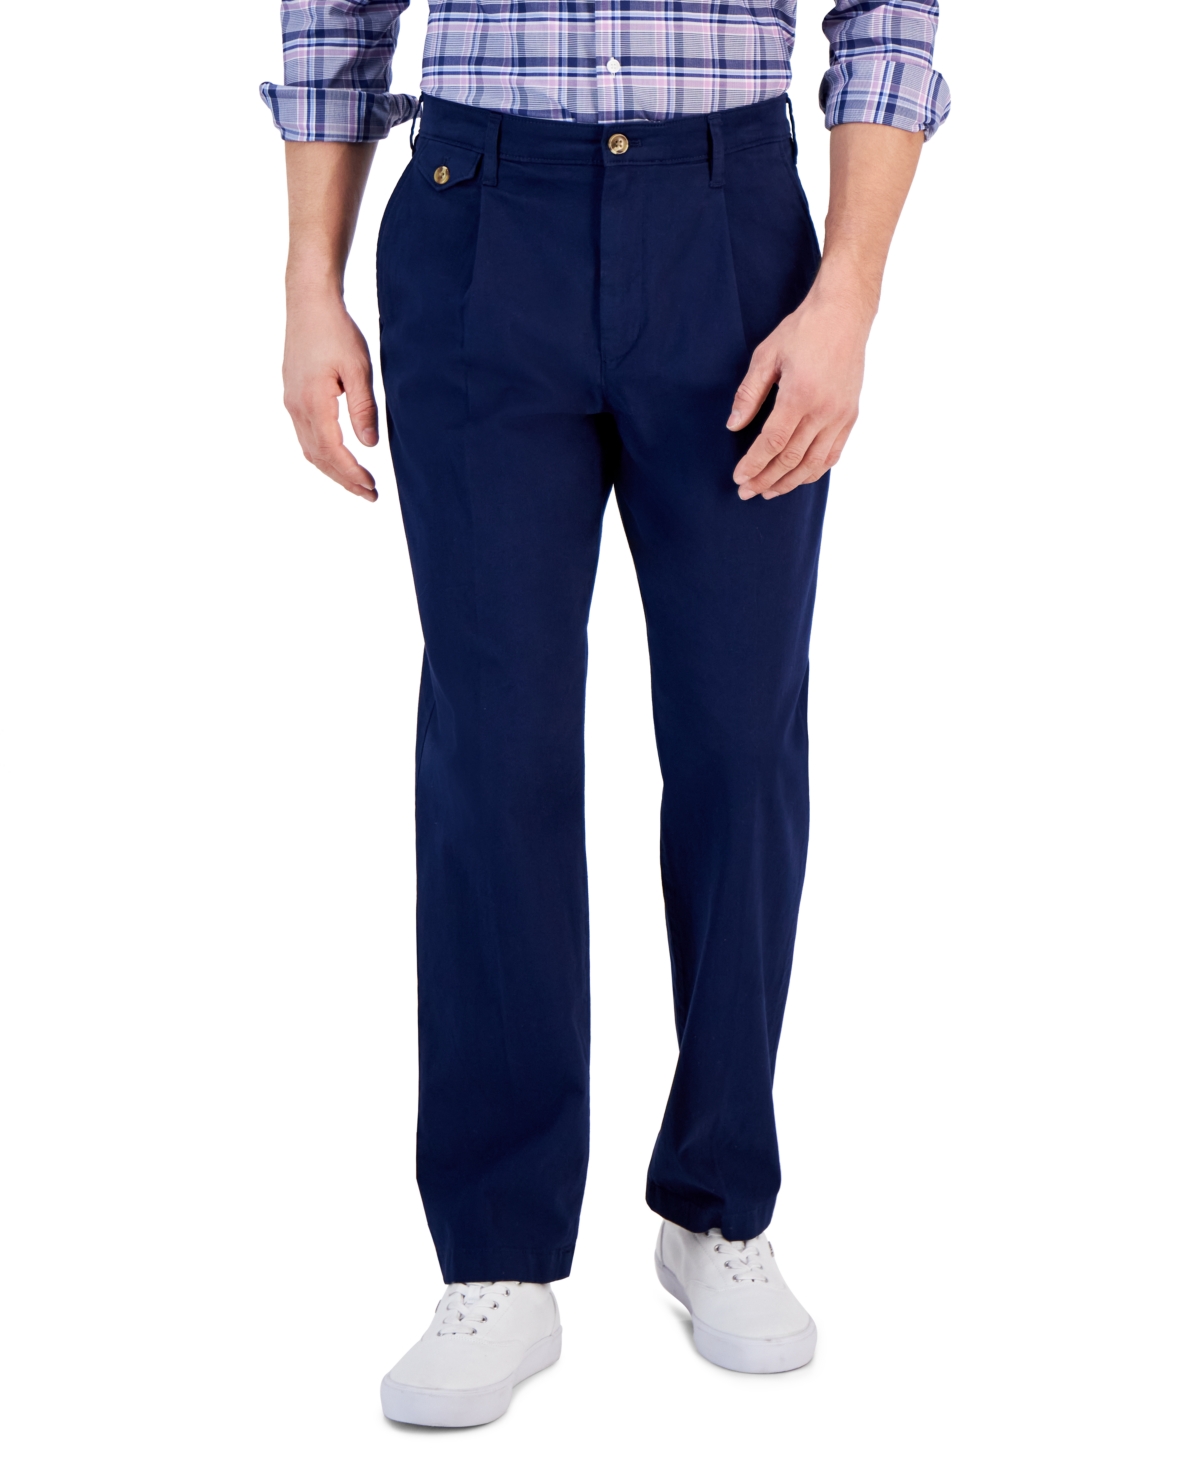 Men's Relaxed-Fit Pleated Chino Pants, Created for Macy's - Navy Blue